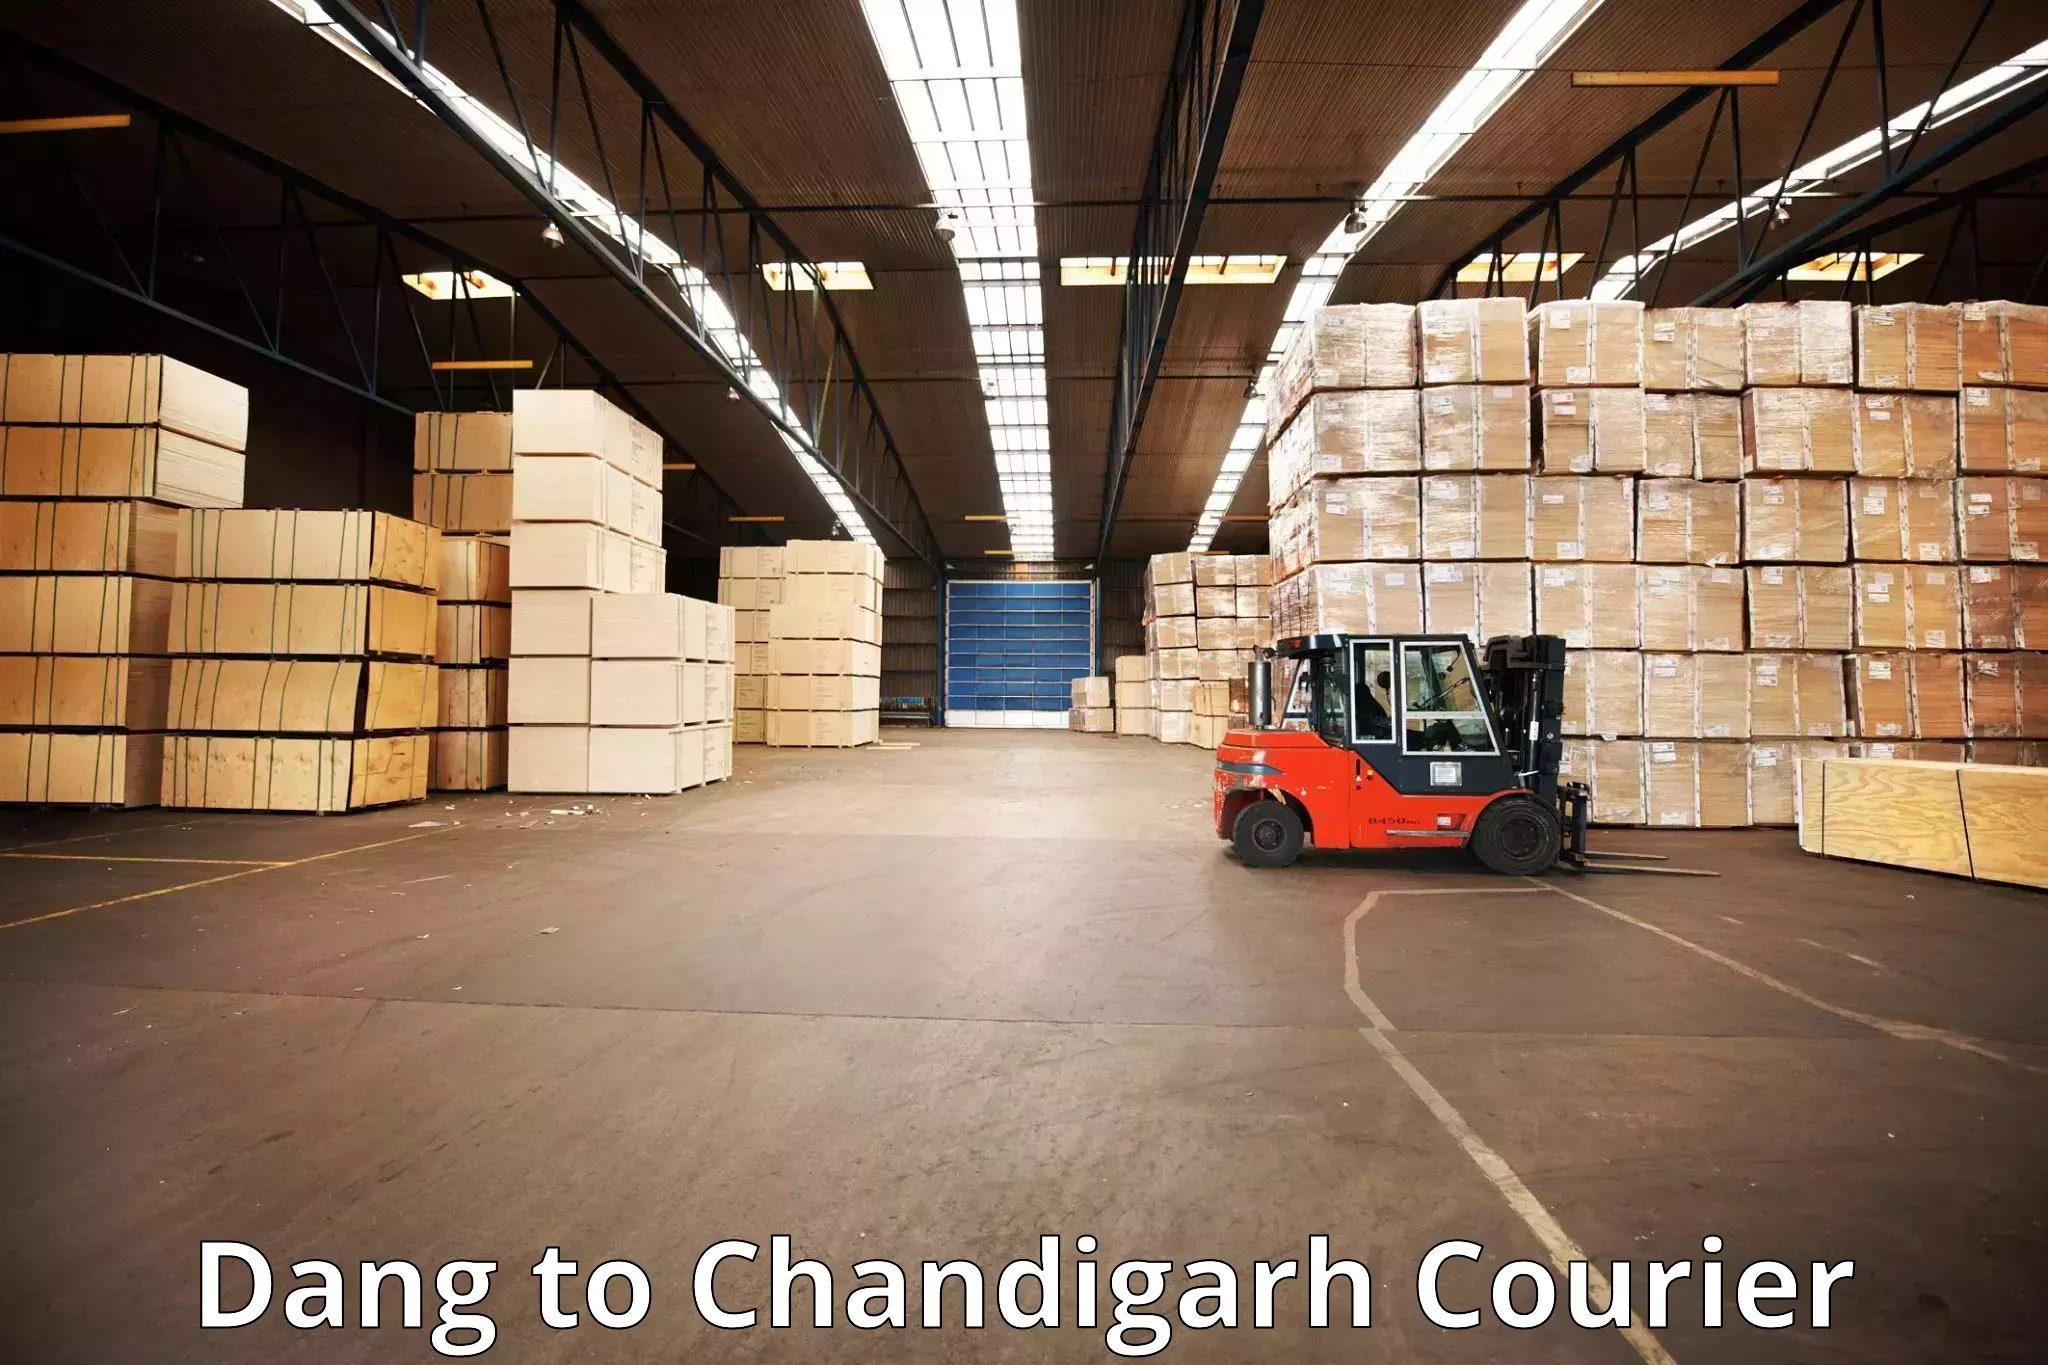 Luggage delivery network Dang to Chandigarh